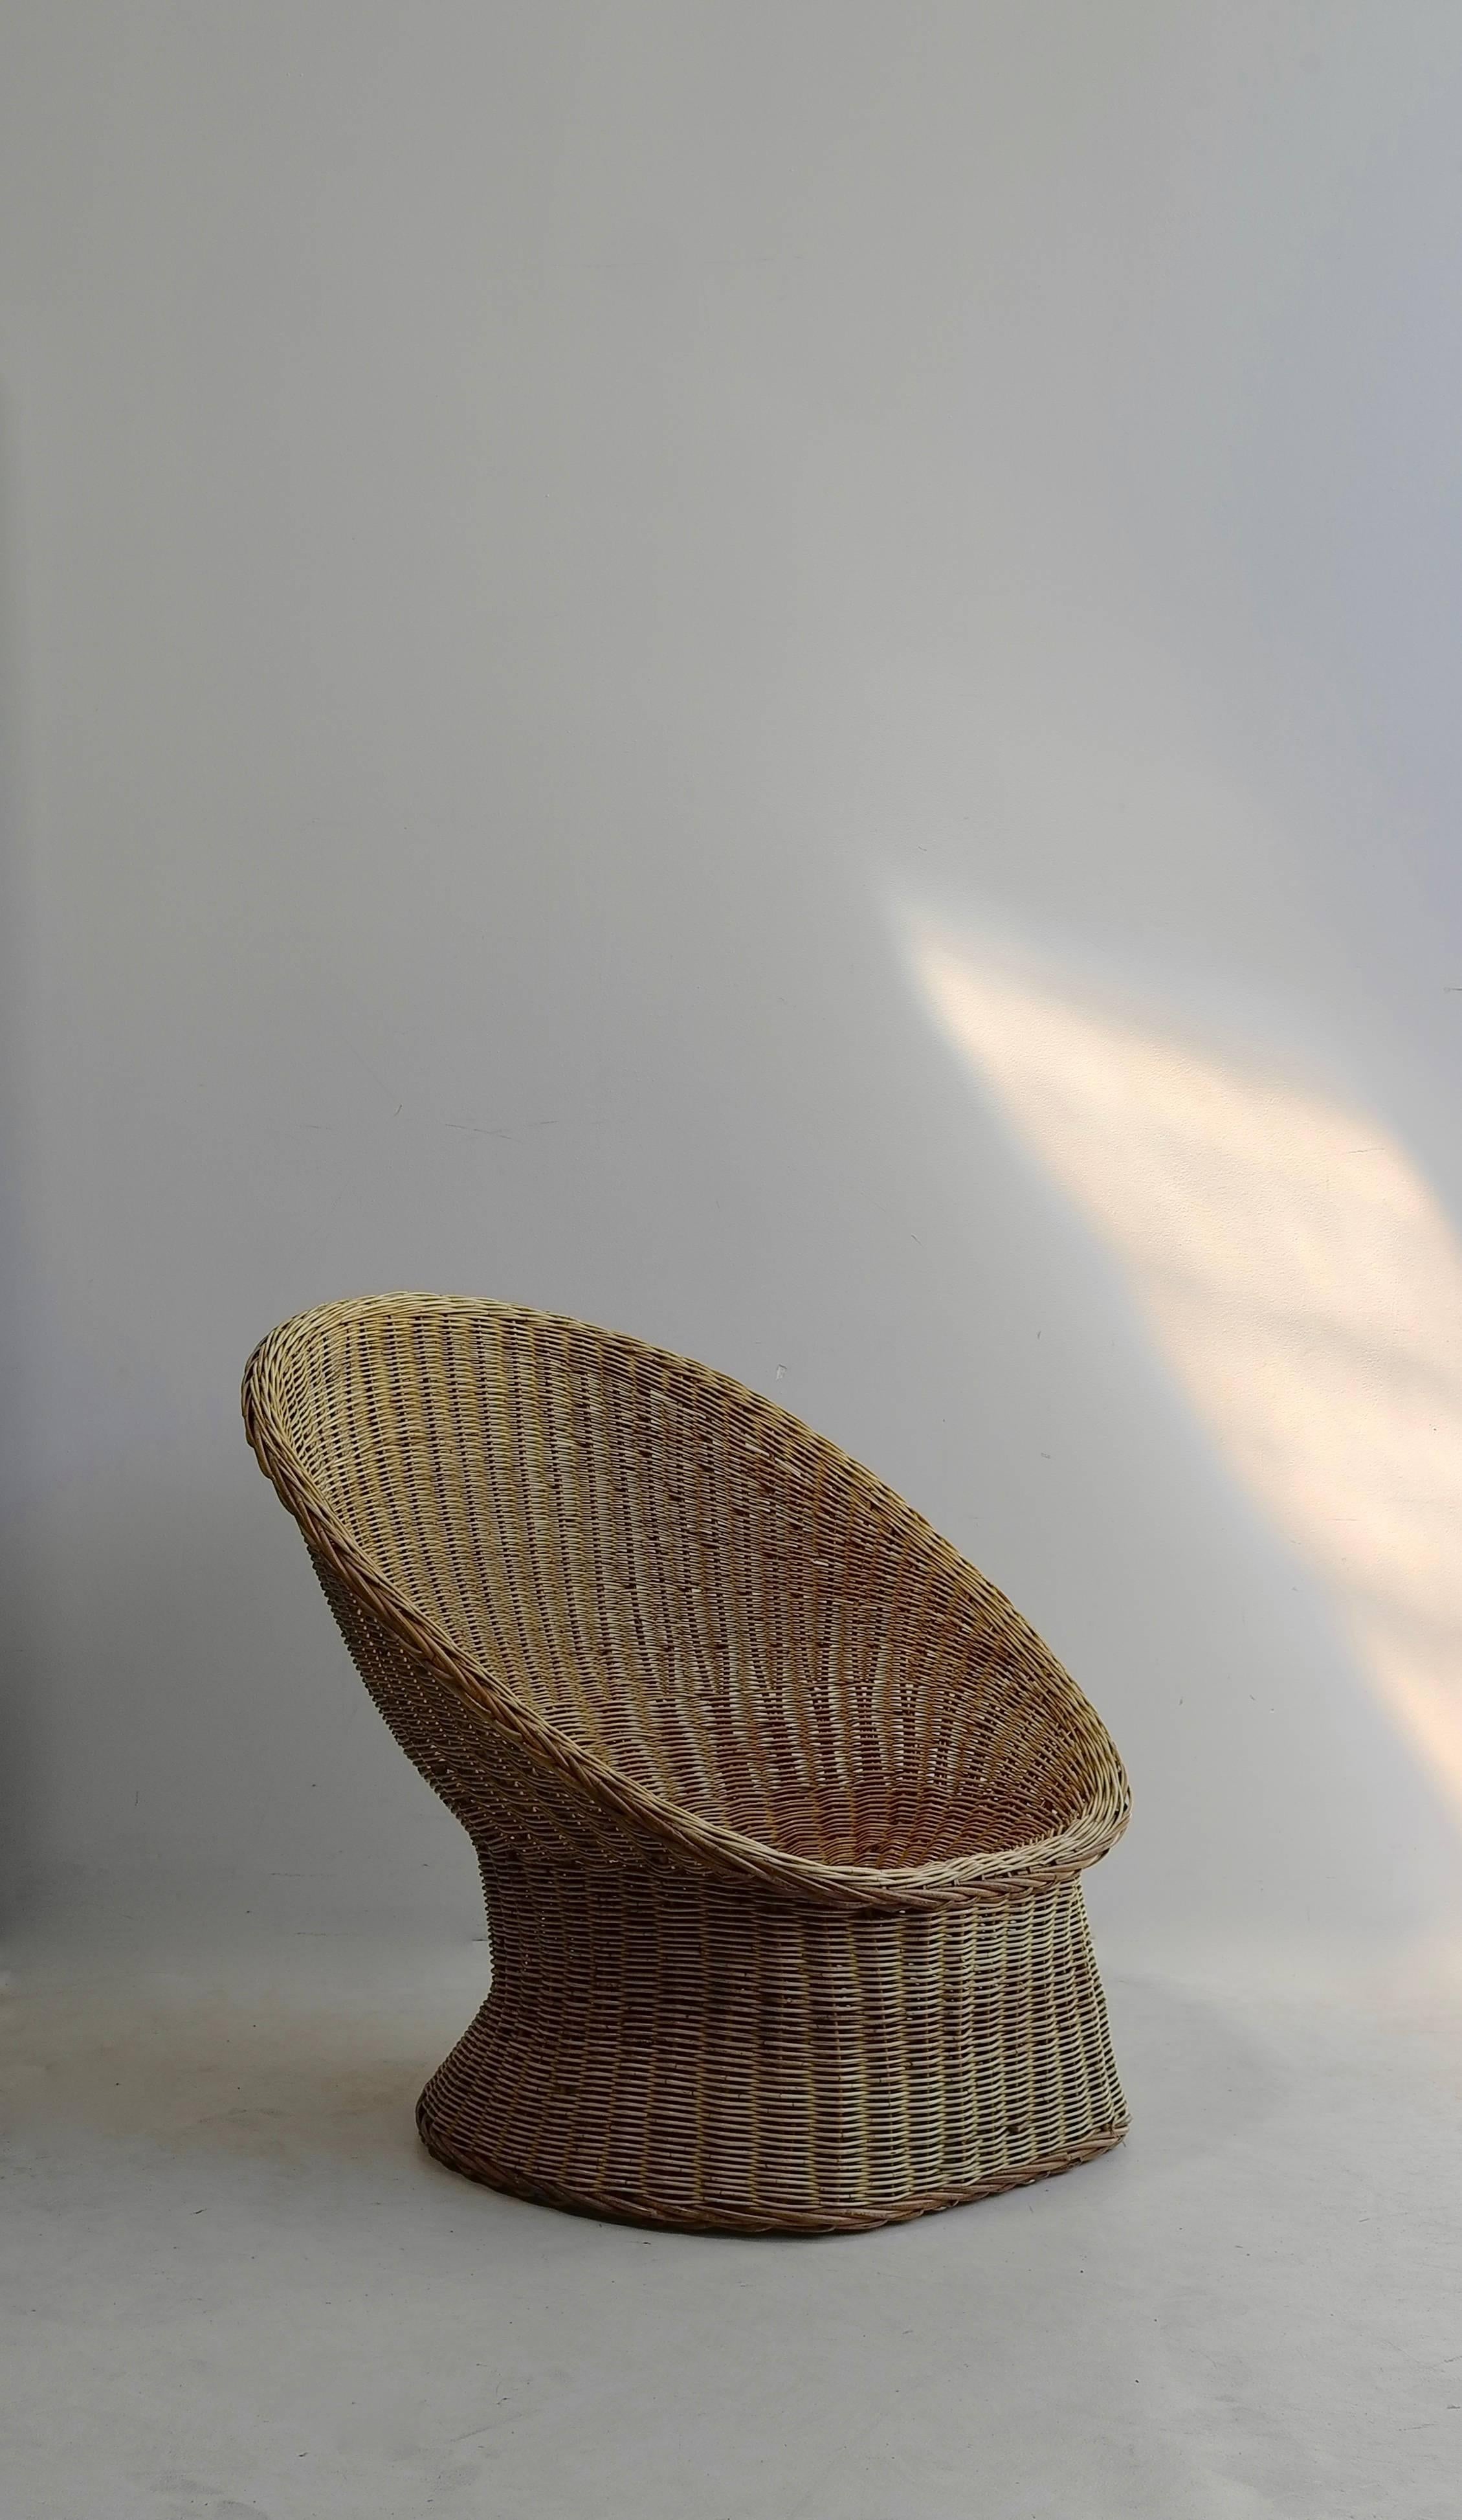 Rare Wicker Egg Shaped Armchair by Wim Den Boon, Holland, 1952 In Excellent Condition For Sale In Den Haag, NL